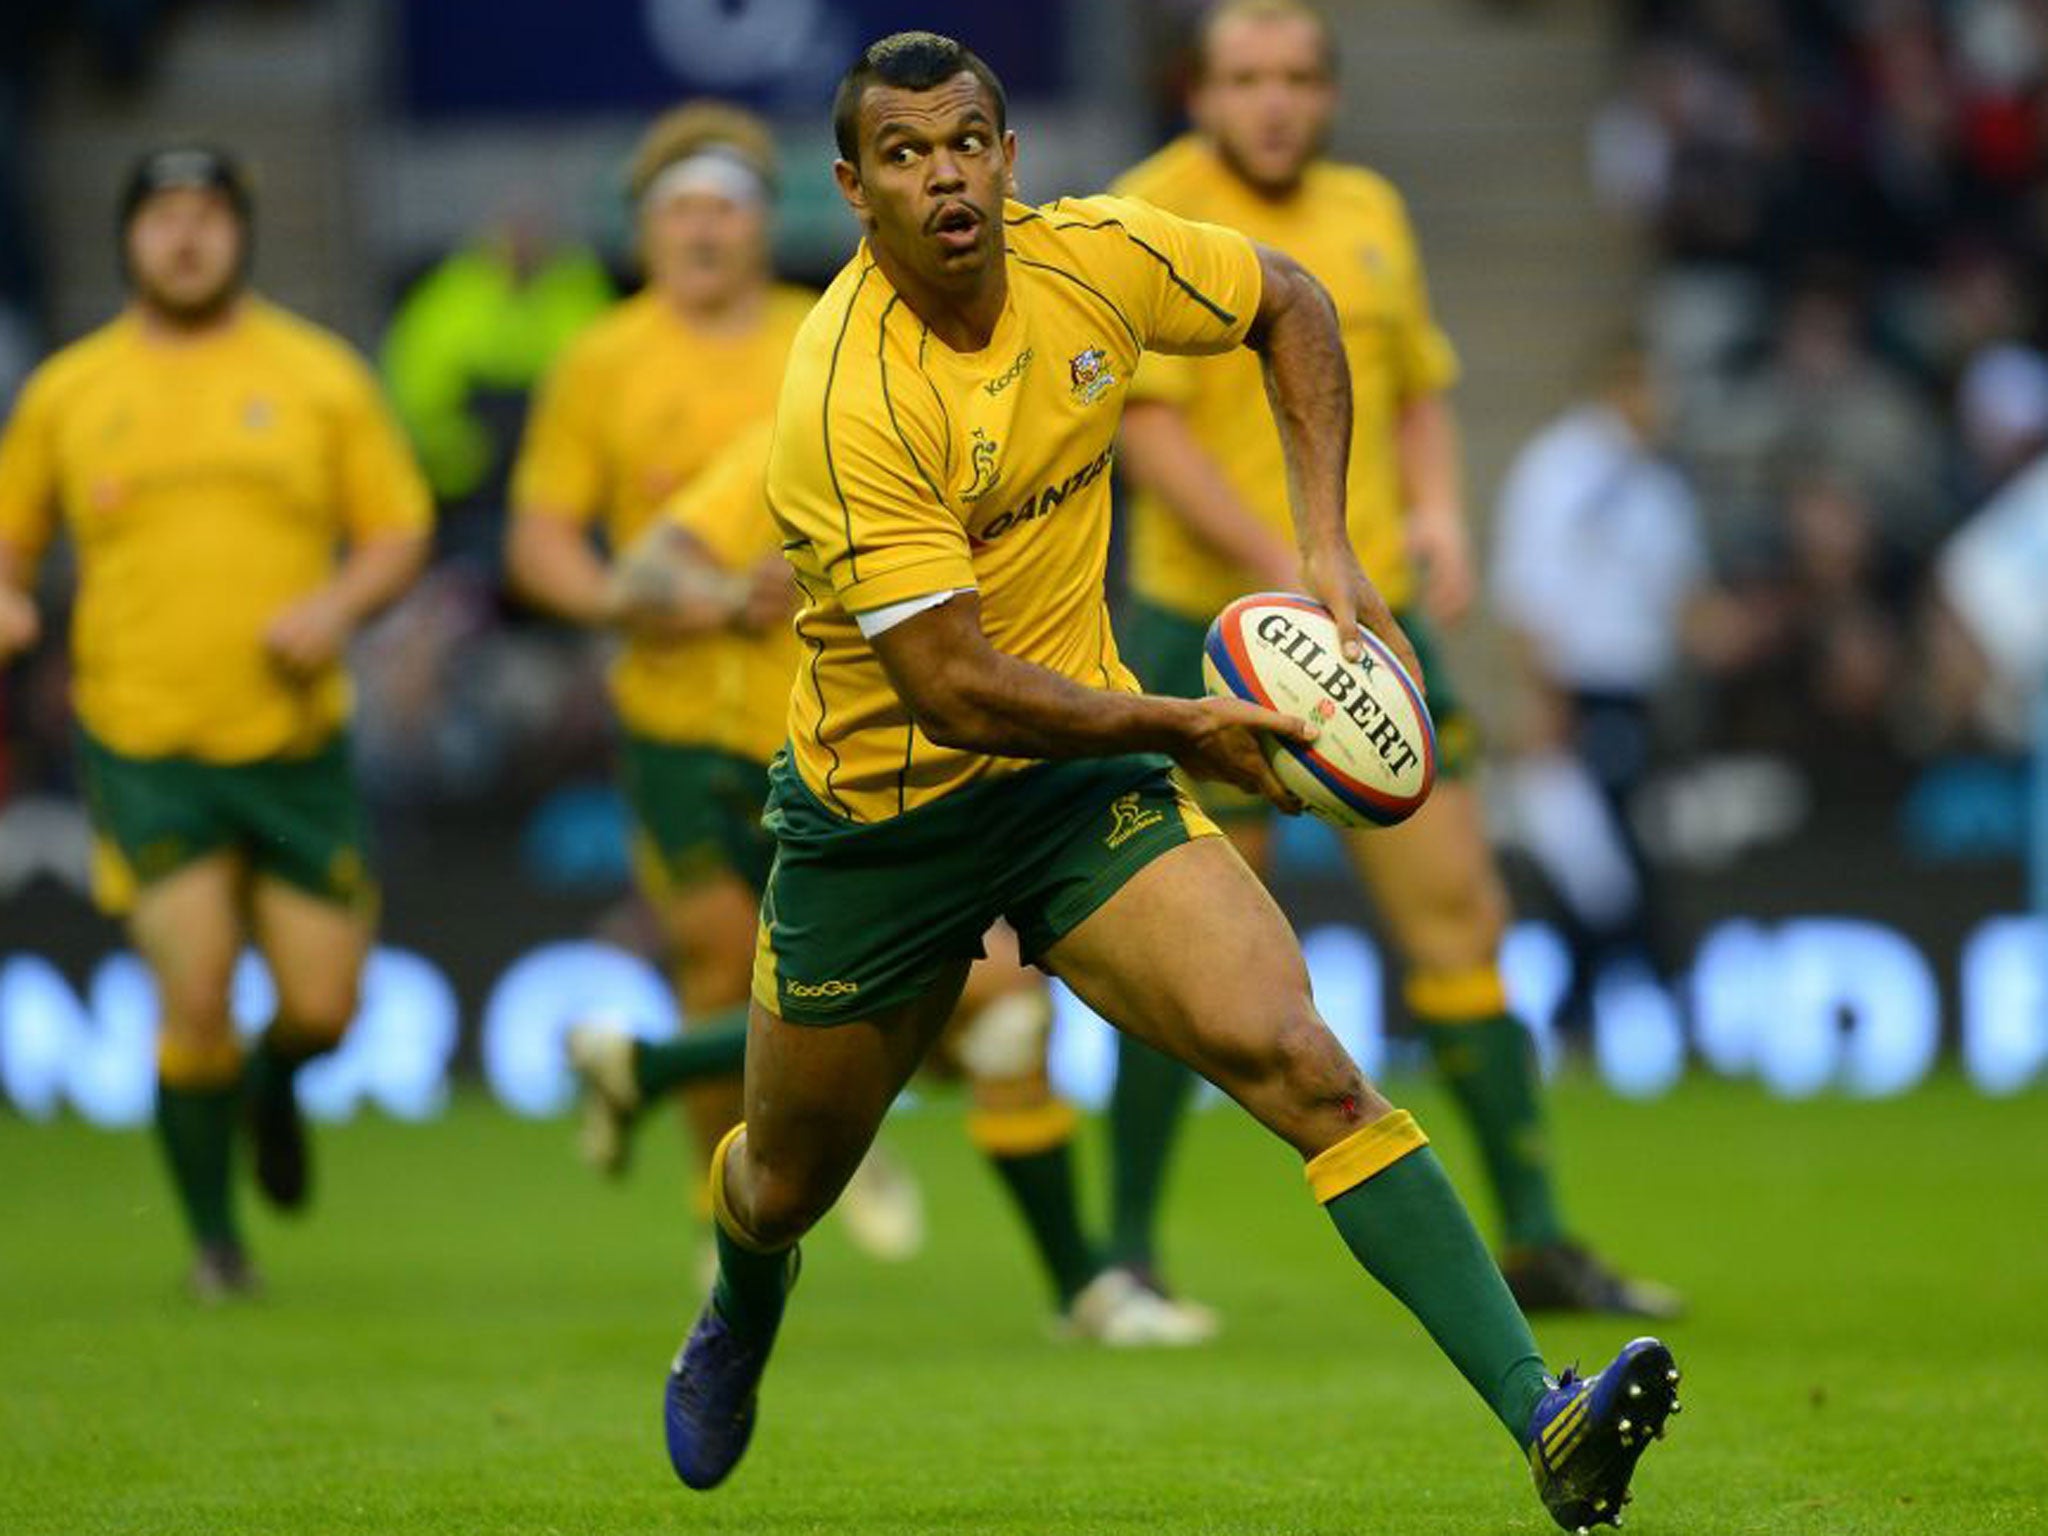 The running of Australia’s No 10 Kurtley Beale will be a big threat to Wales this afternoon